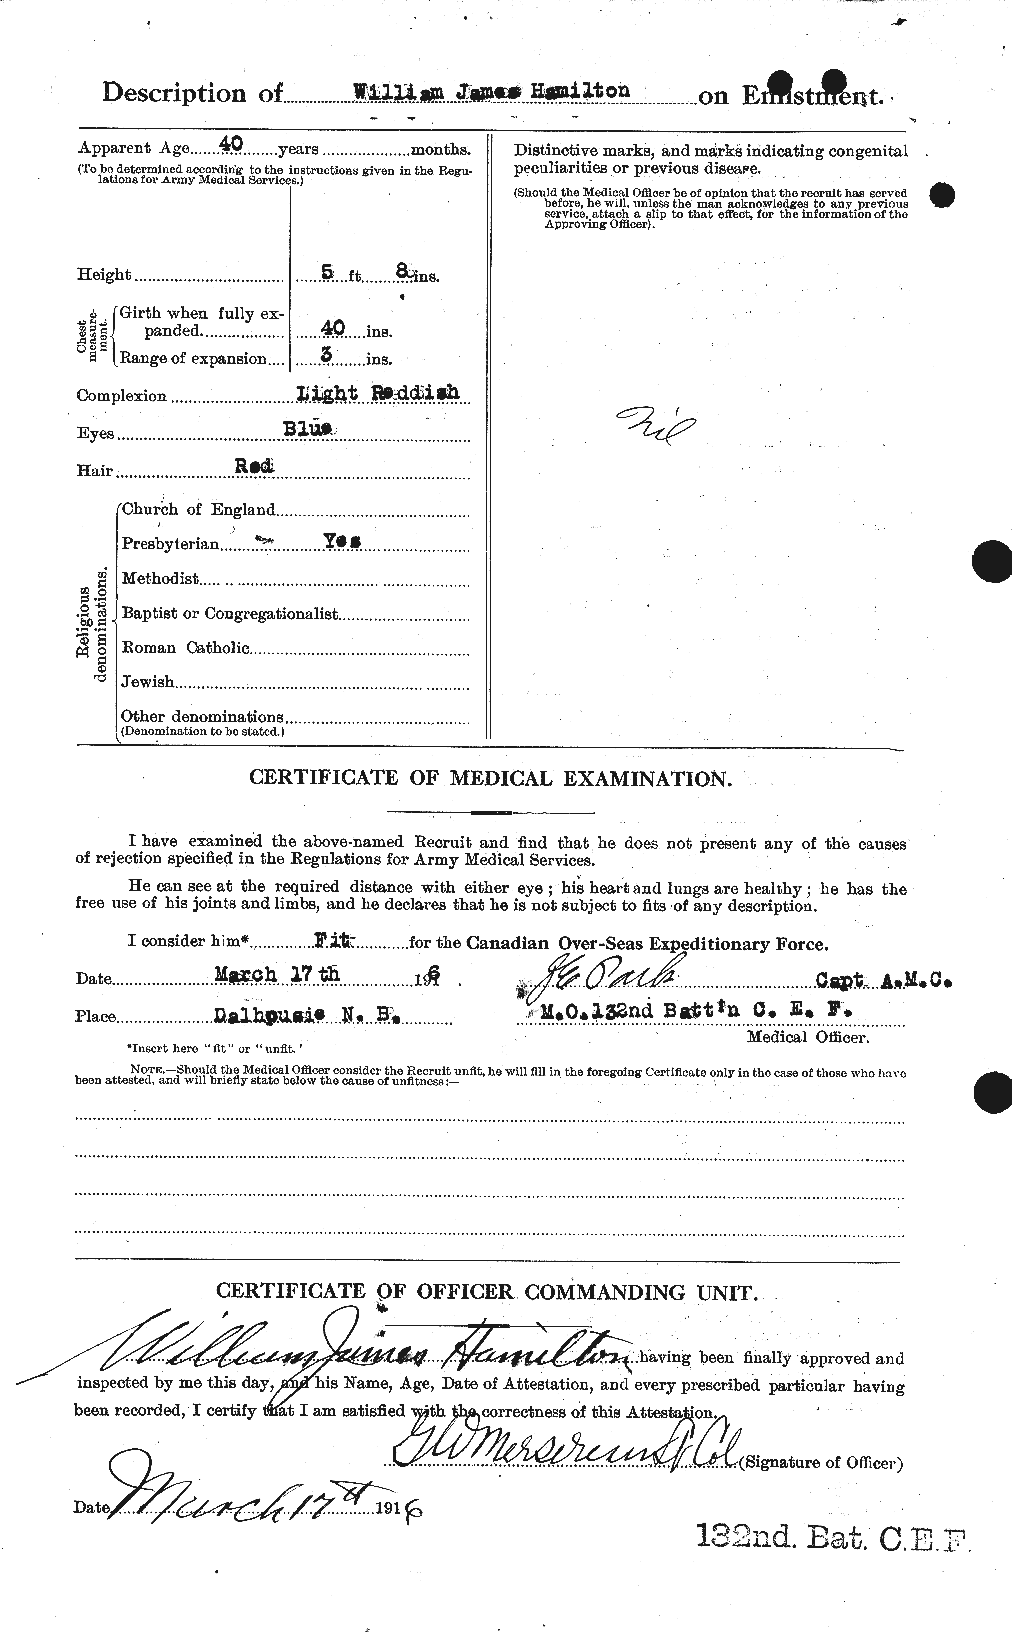 Personnel Records of the First World War - CEF 374903b